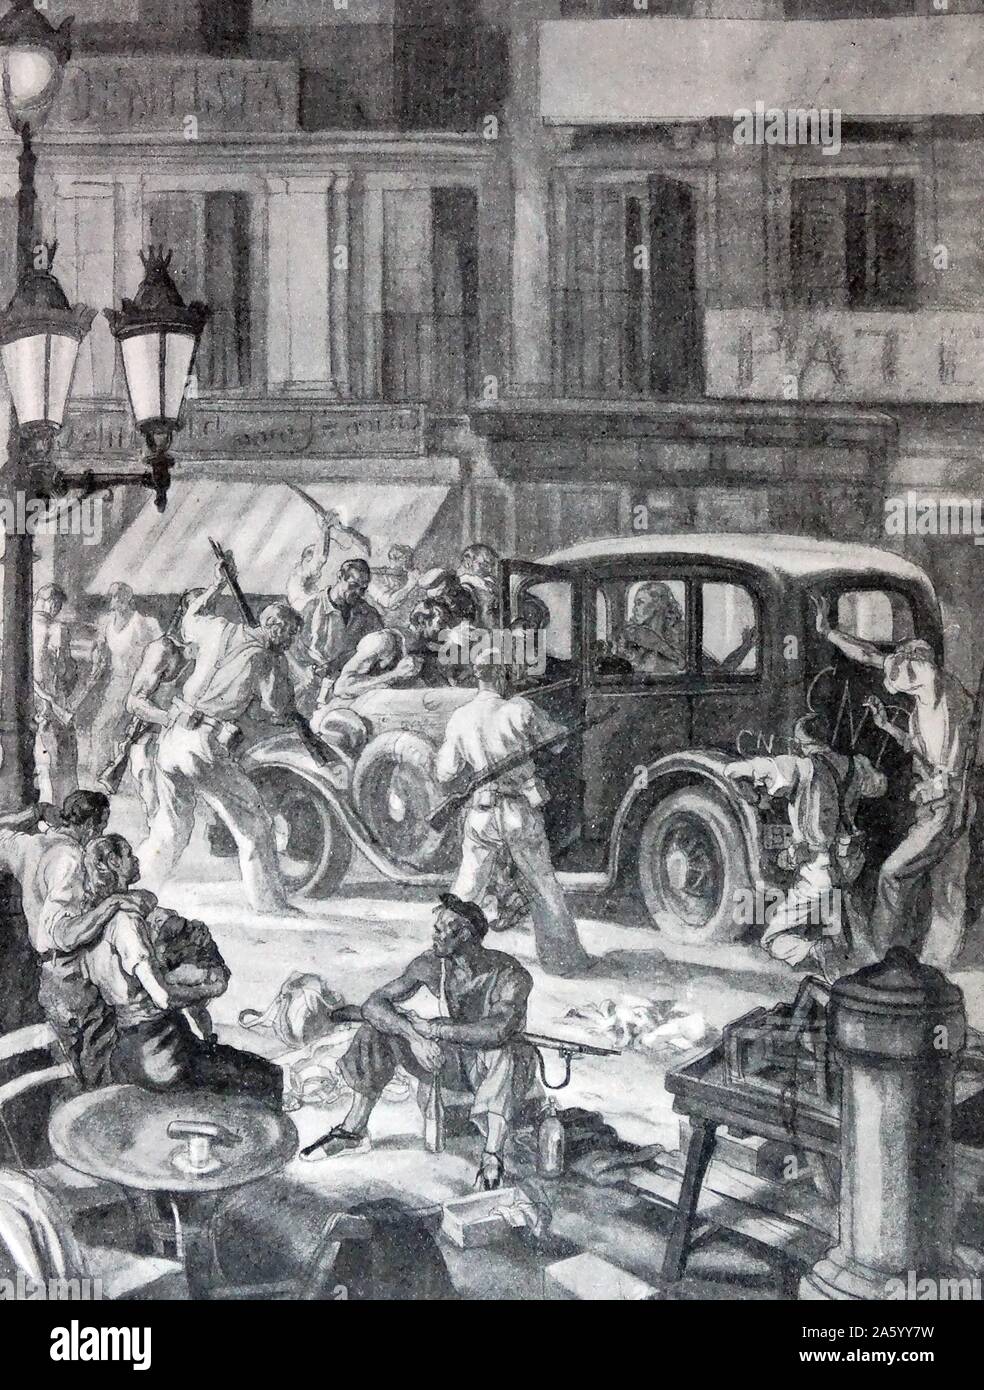 car is seized by anarchist republican militia during the Spanish civil war. Illustration By Carlos Saenz de Tejada (1897 - 1958 ) Spanish painter and illustrator;identified with the Nationalist (Fascist) side in the Spanish Civil War. Stock Photo